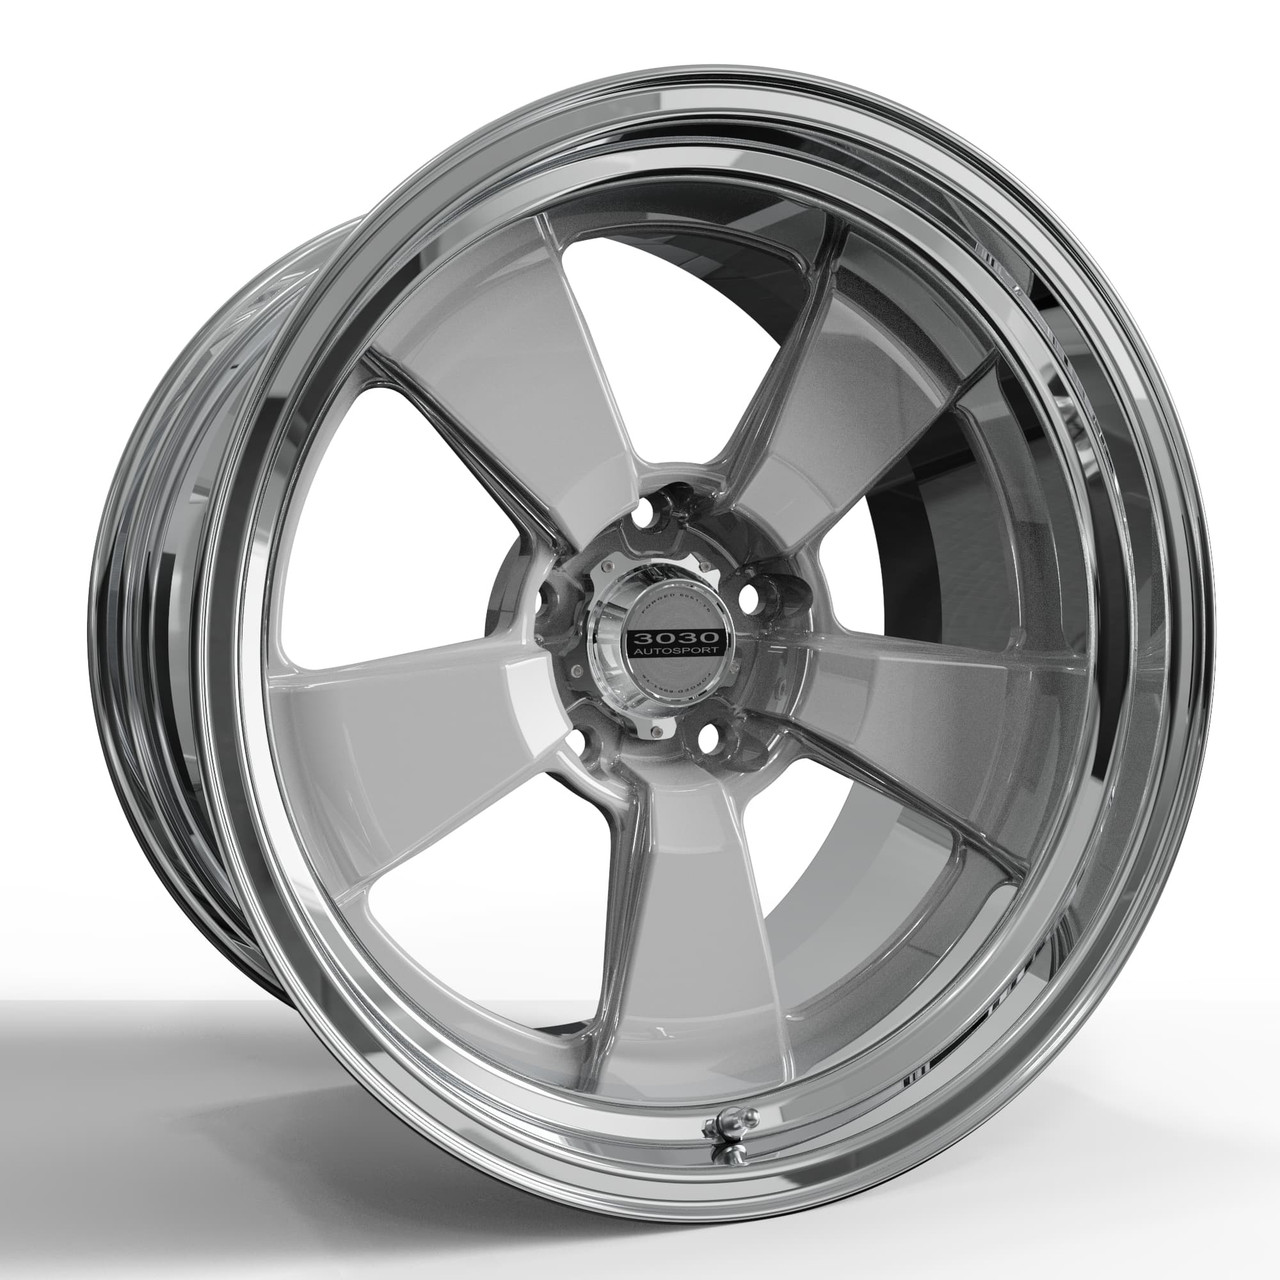 Retro 3030 Autosport Forged Muscle Car Performance Wheel